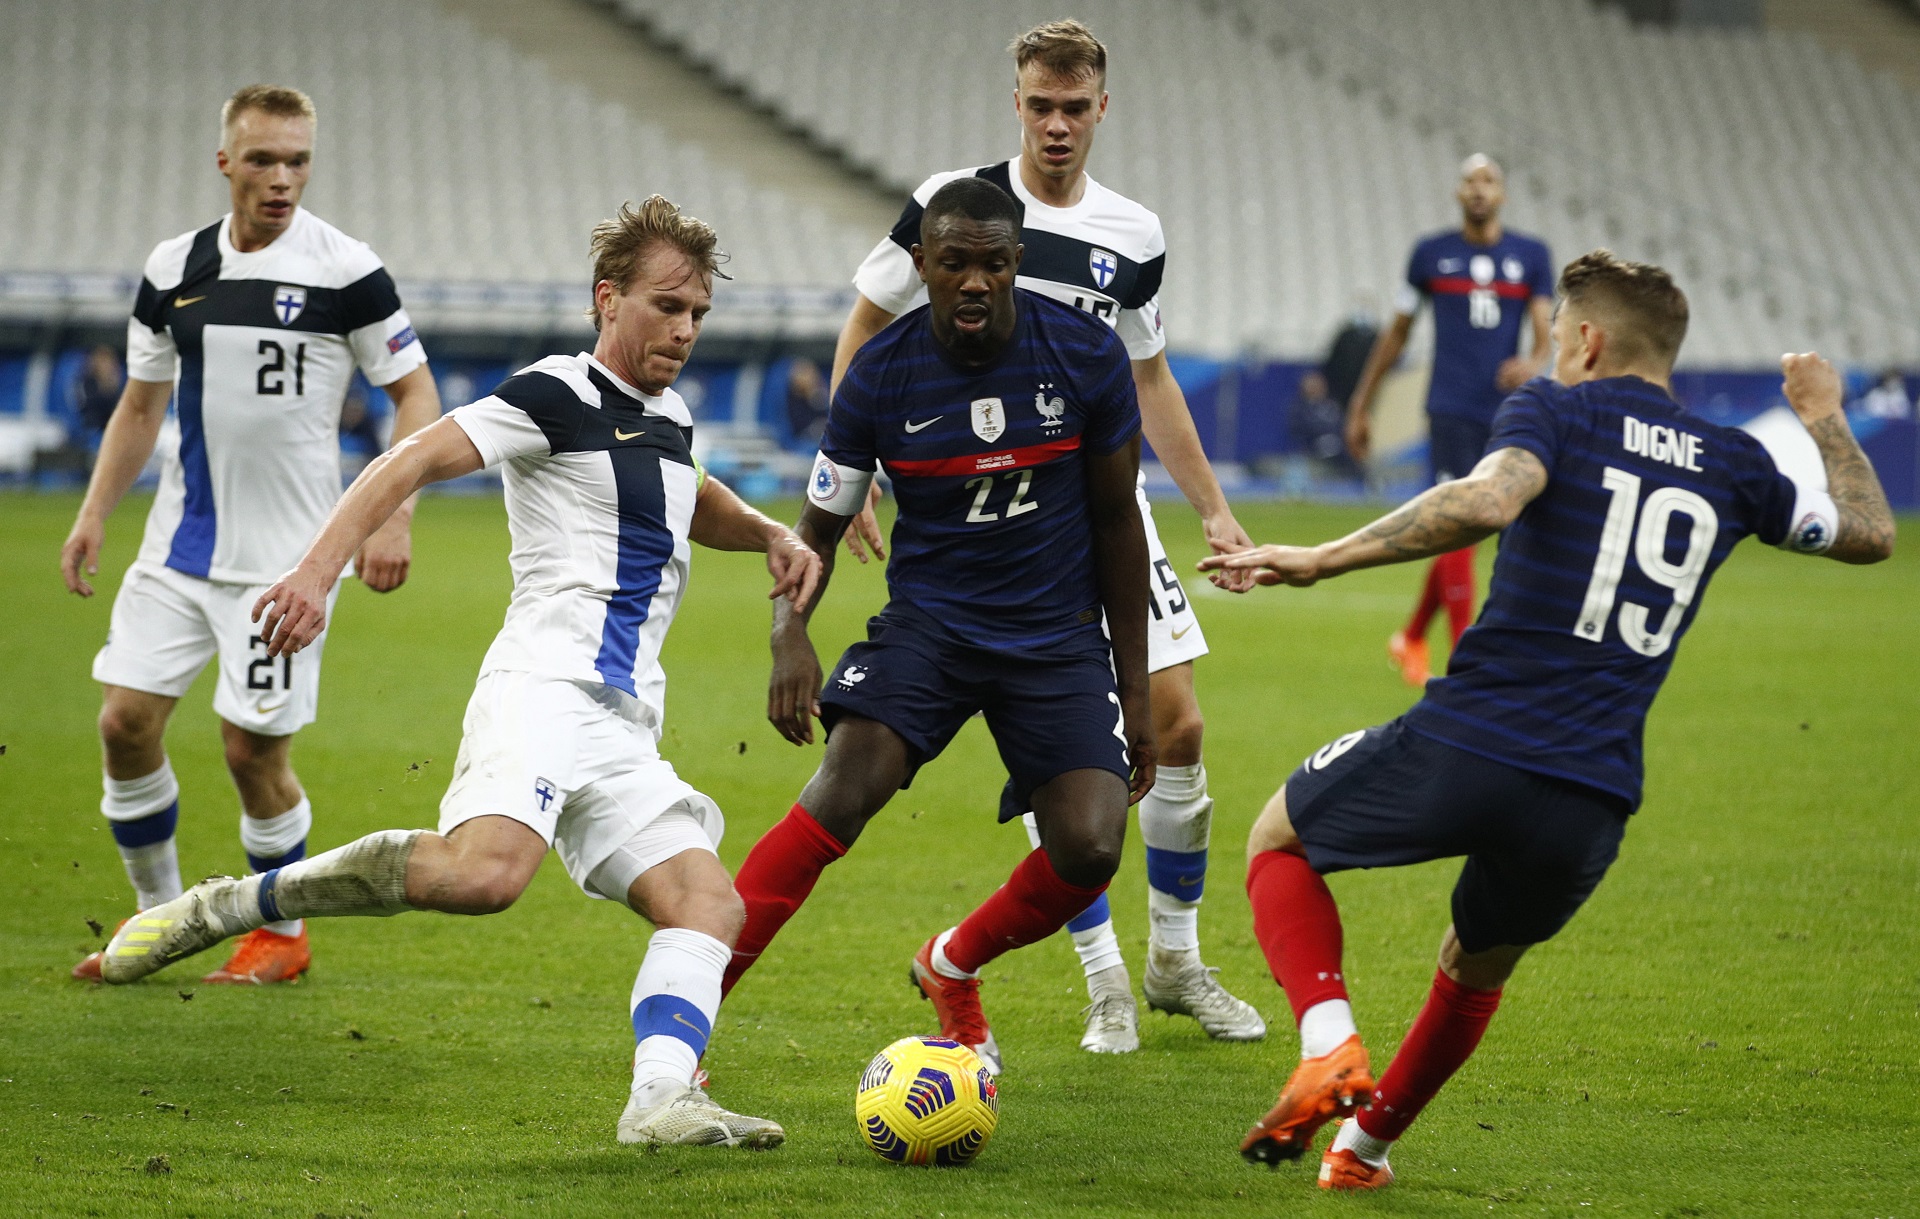 epa08814540 France's Lucas Digne (R), Marcus Thuram (C) and Finland's Rasmus Schueller  (L) in action during the friendly soccer match between France and Finland in Paris, France, 11 November 2020.  EPA/YOAN VALAT